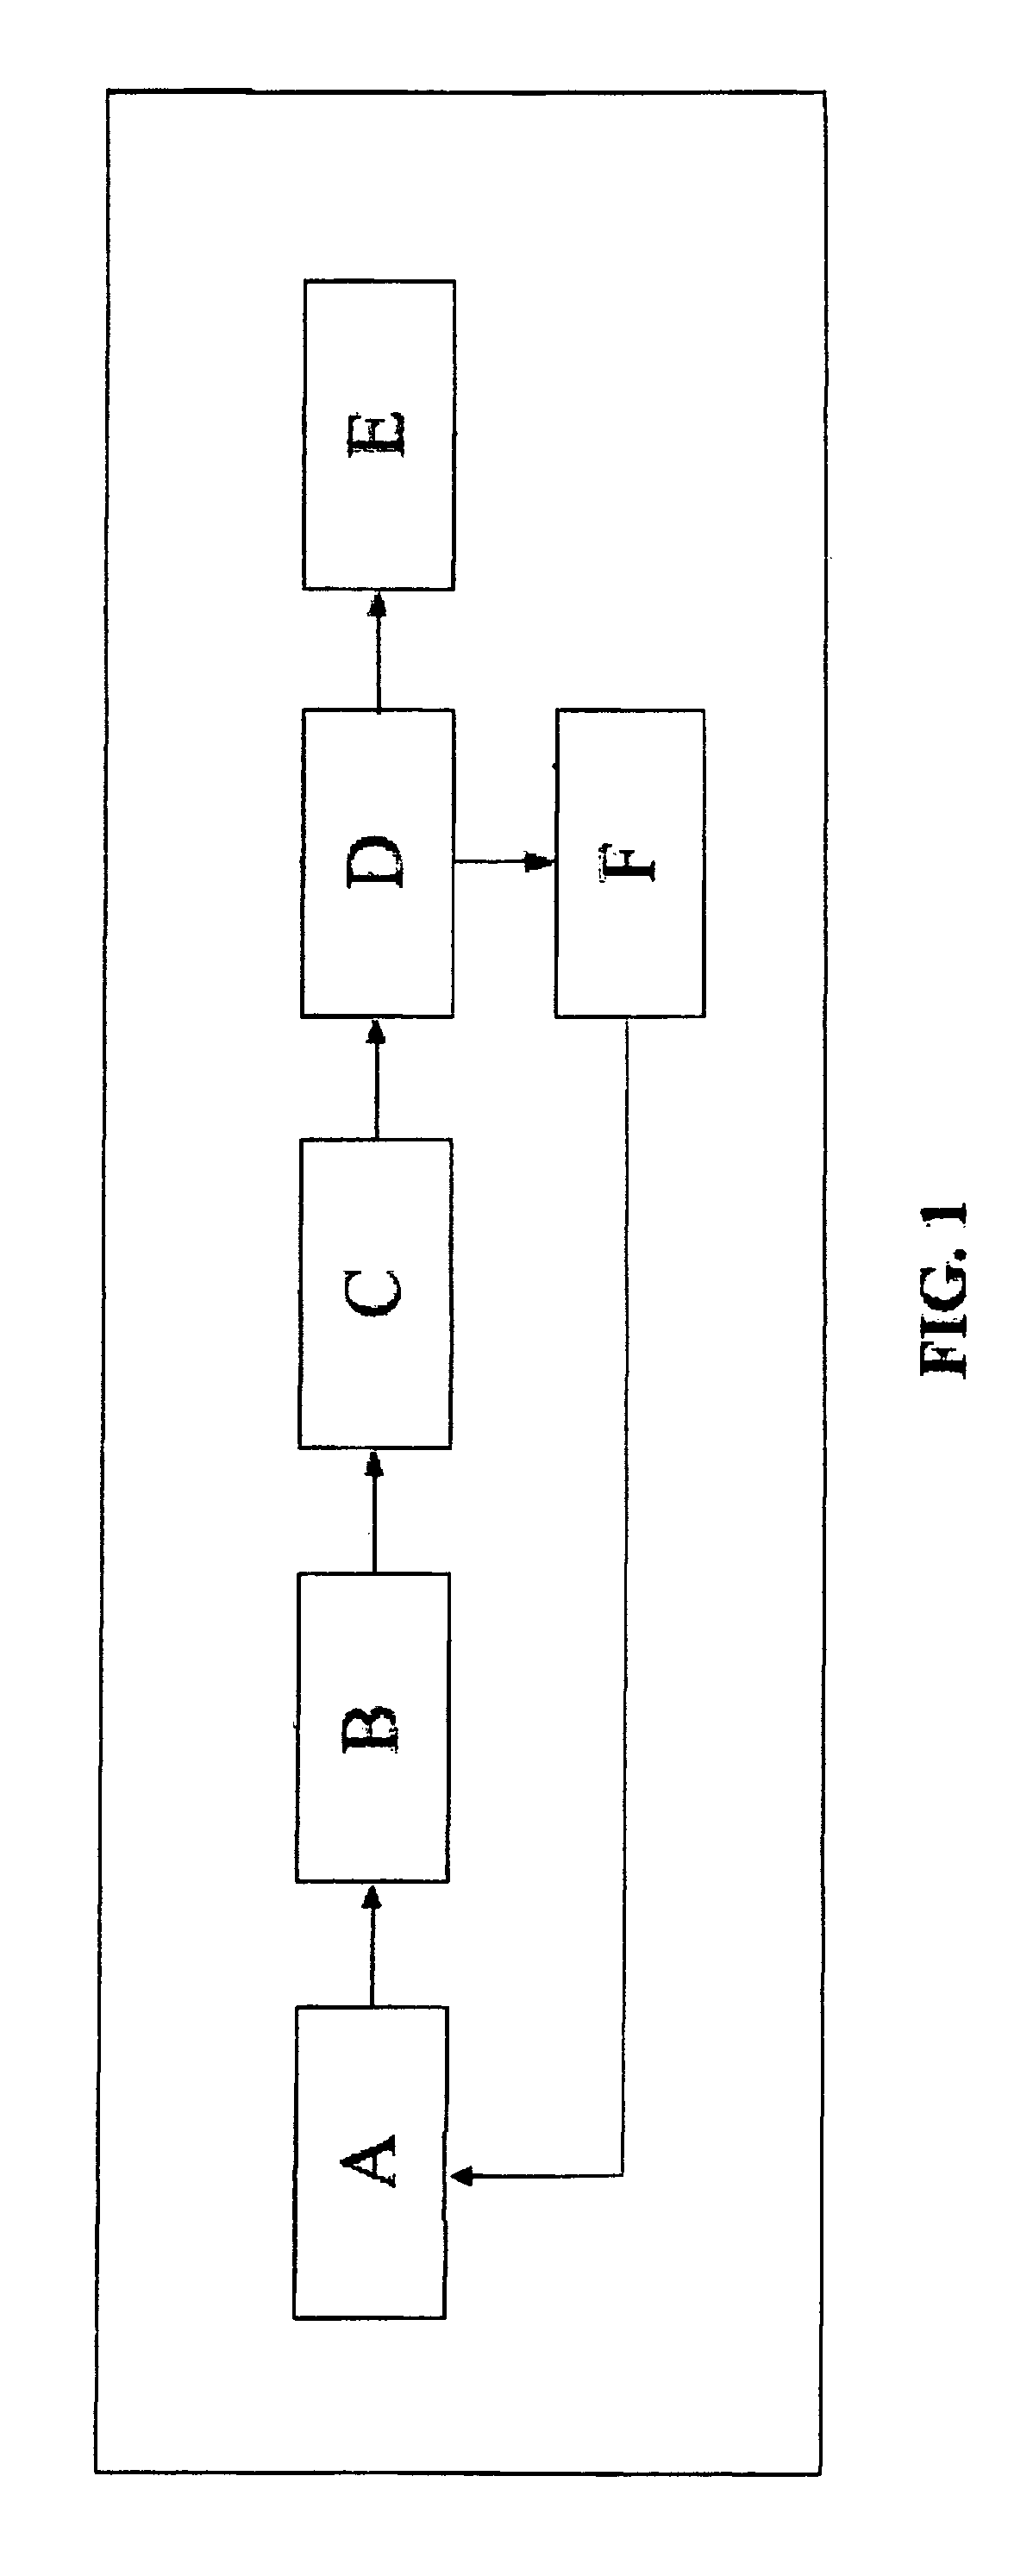 Catalyst and process for the production of diesel fuel from natural gas, natural gas liquids, or other gaseous feedstocks